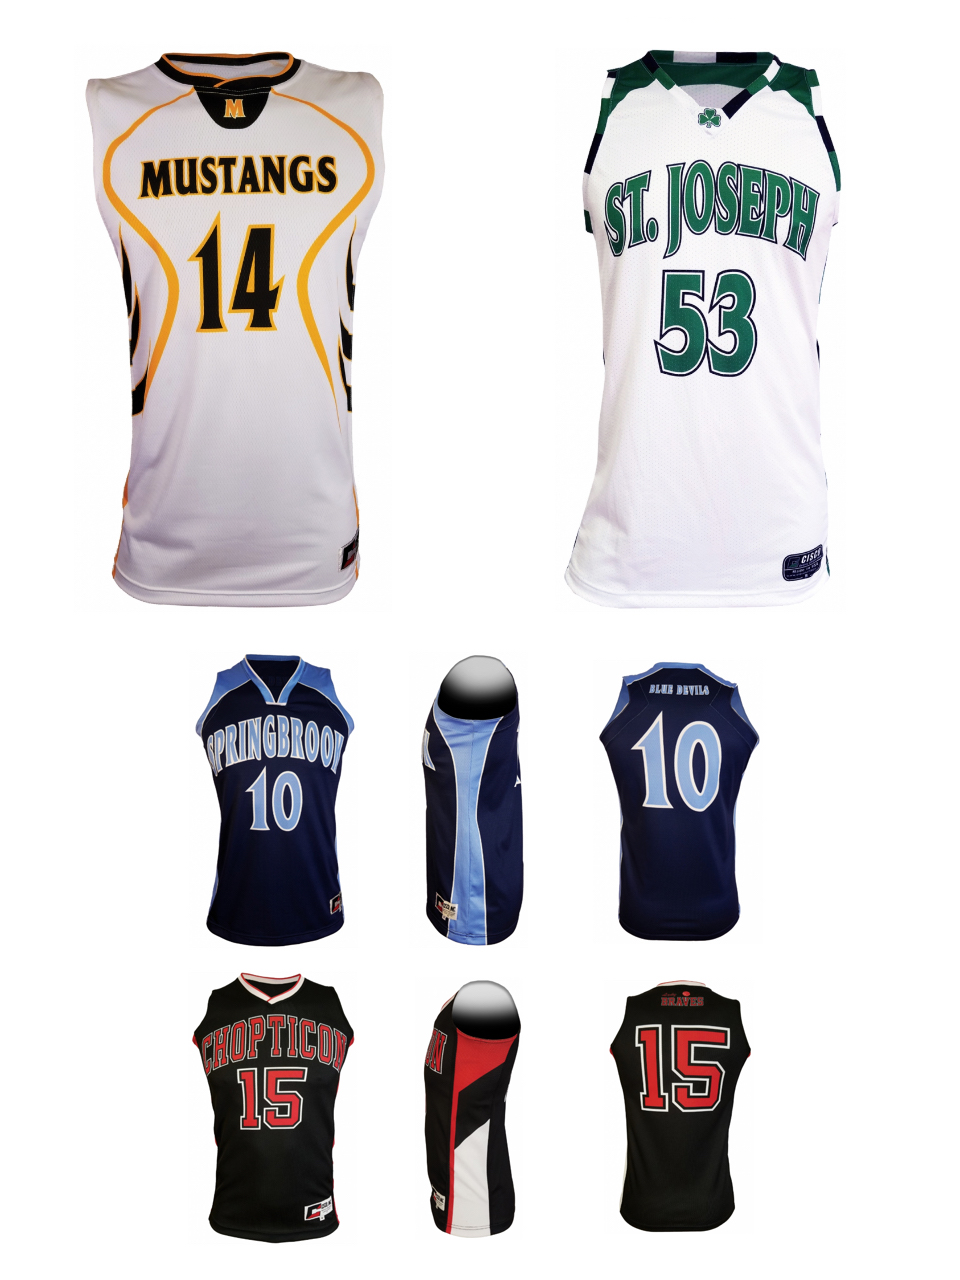 Custom Basketball Uniforms & Jerseys for your Team - Made in the USA by  Cisco Athletic